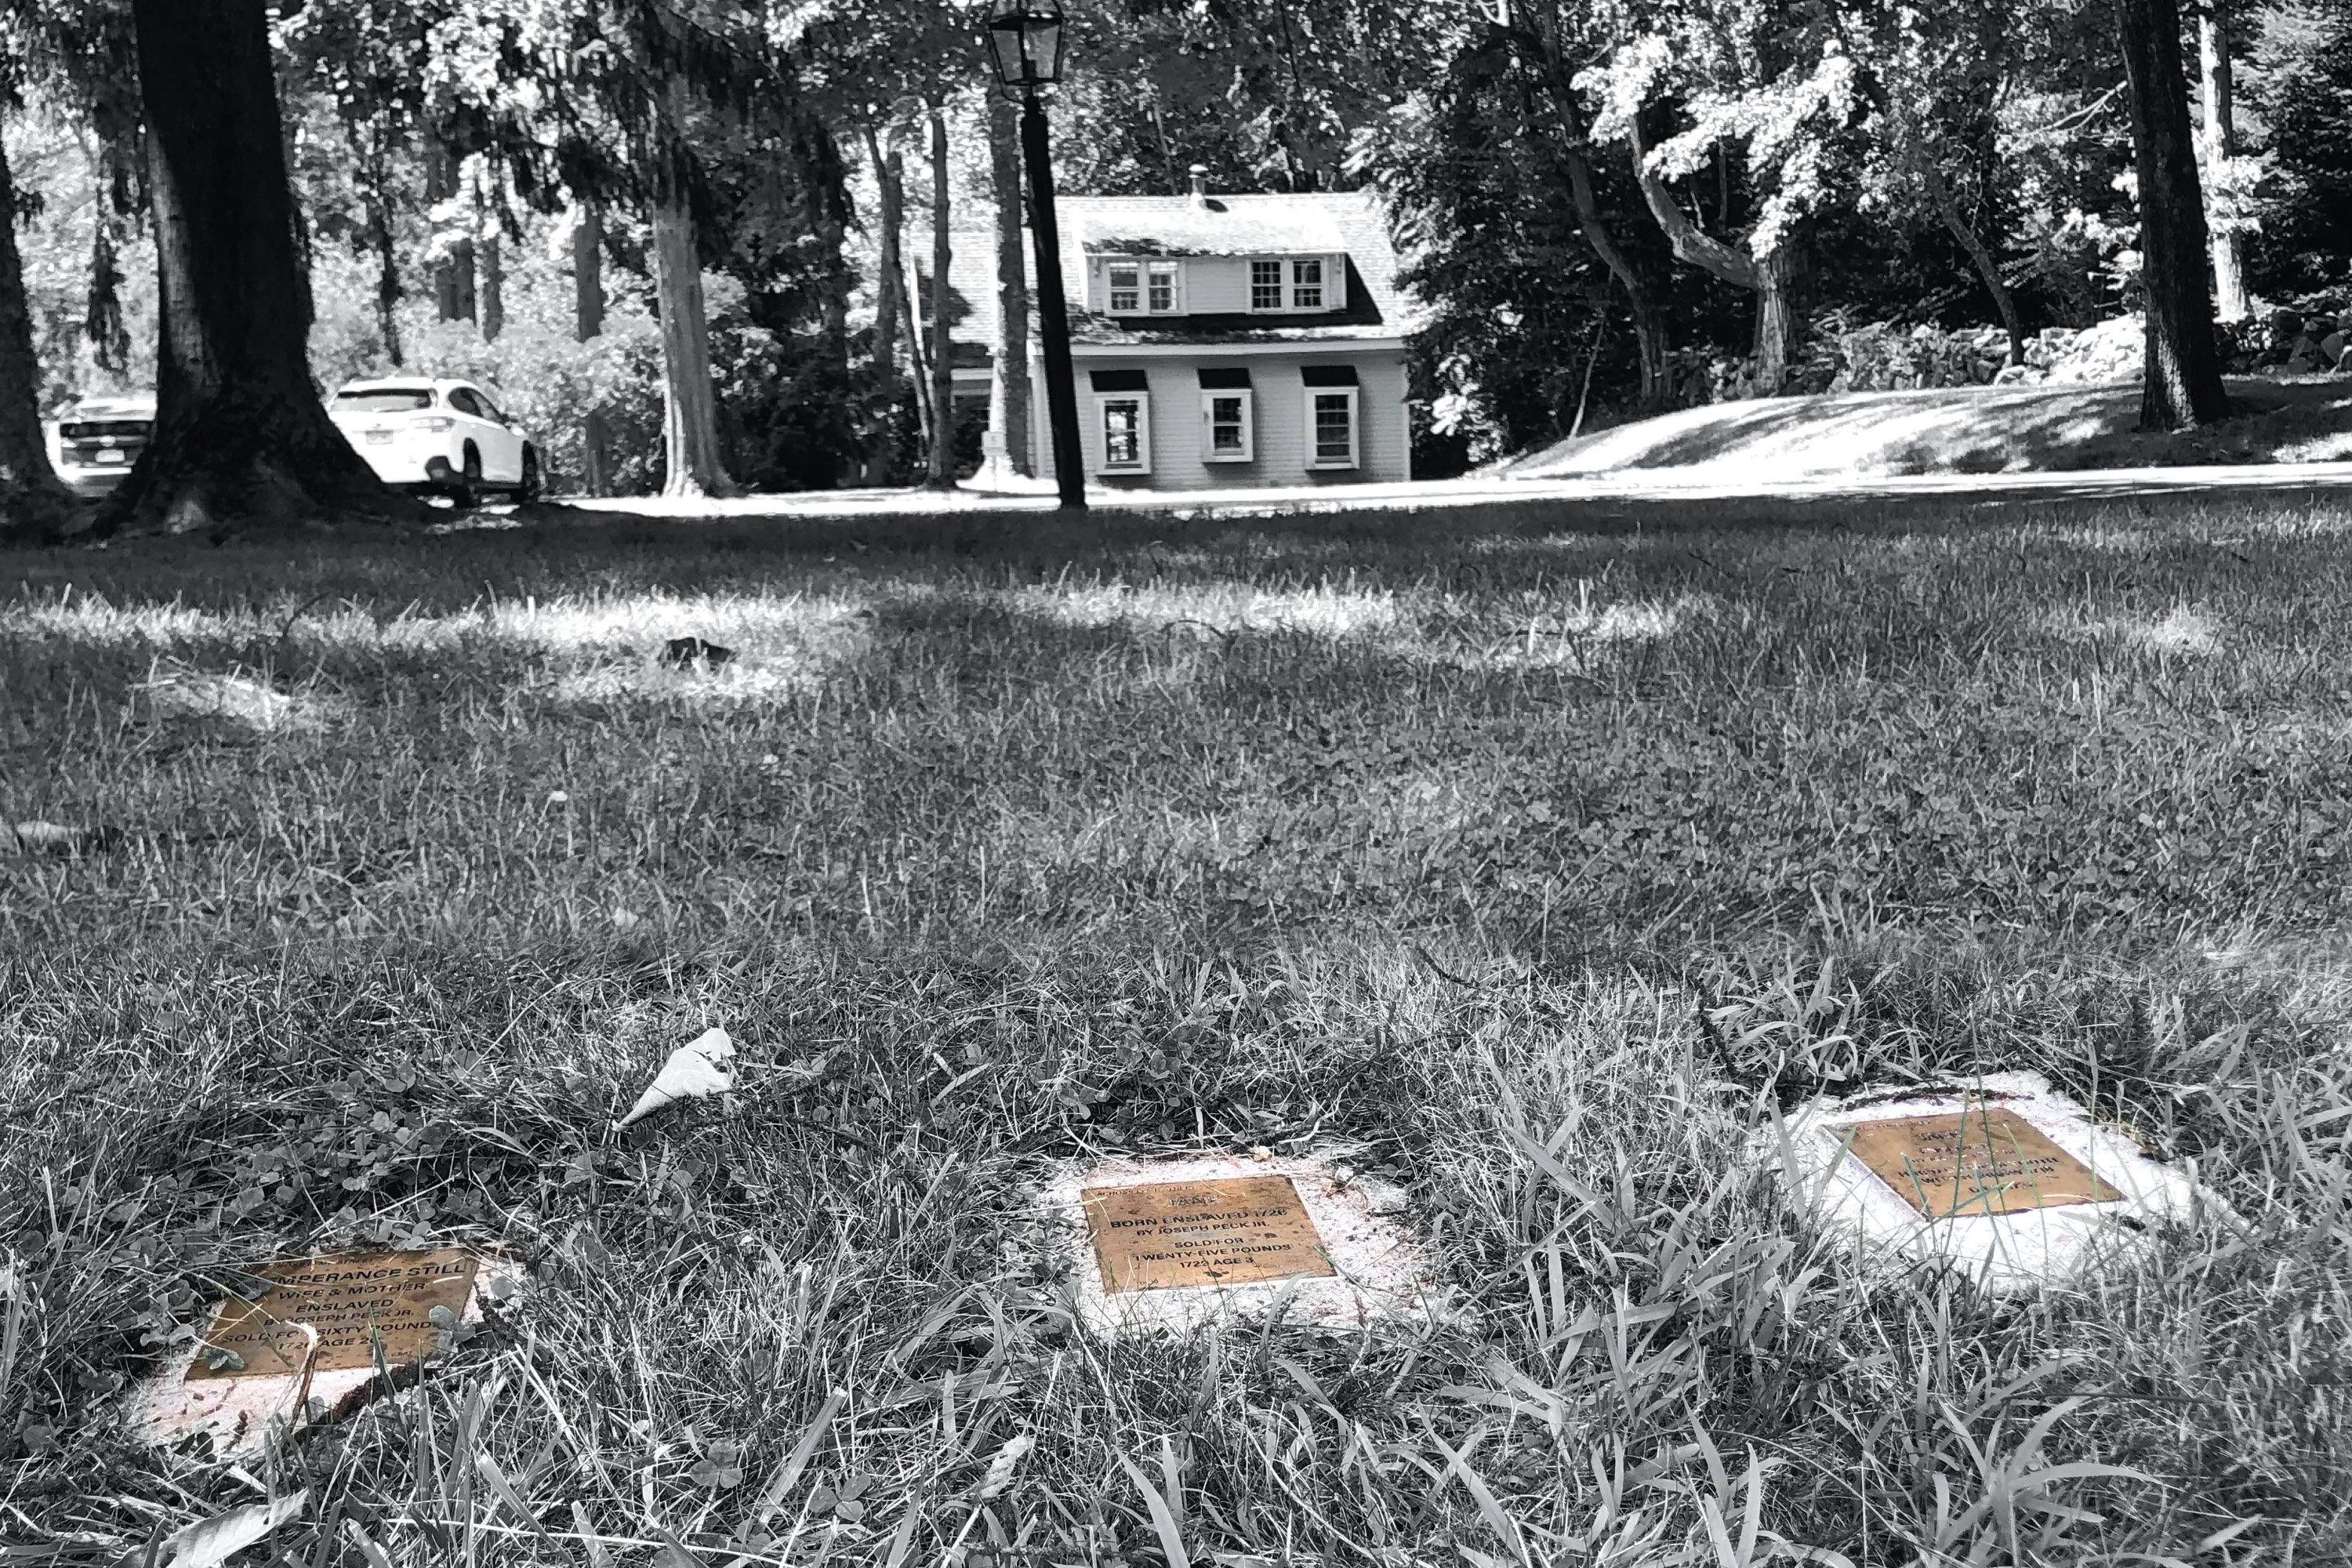 Witness stone markers in front of a house in Old Lyme, CT